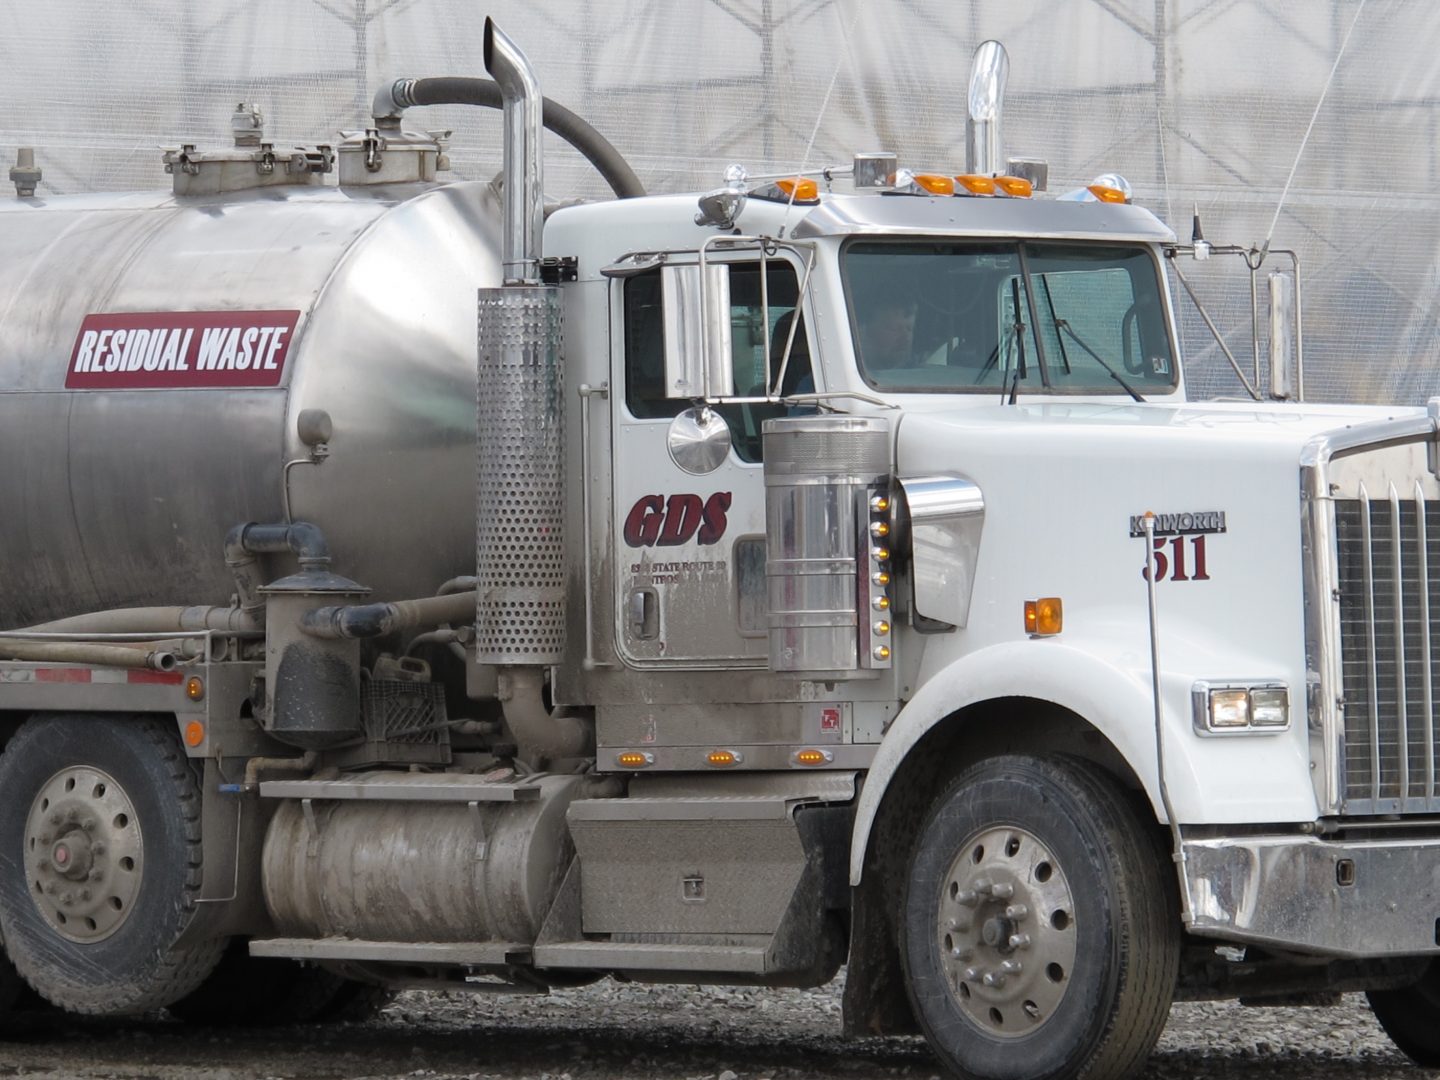 In this file photo from 2012, a truck delivers fracking wastewater to a Susquehanna County recycling center